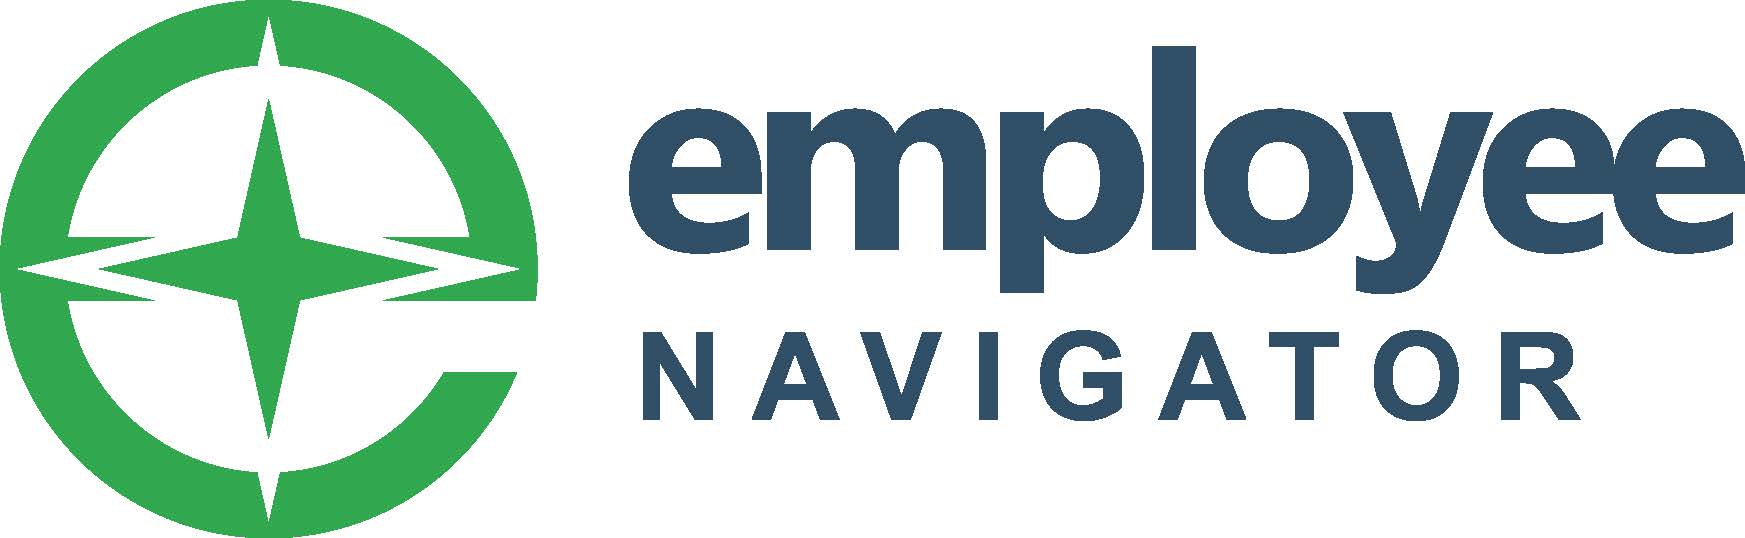 Employee Navigator human resources software review Accurate Reviews